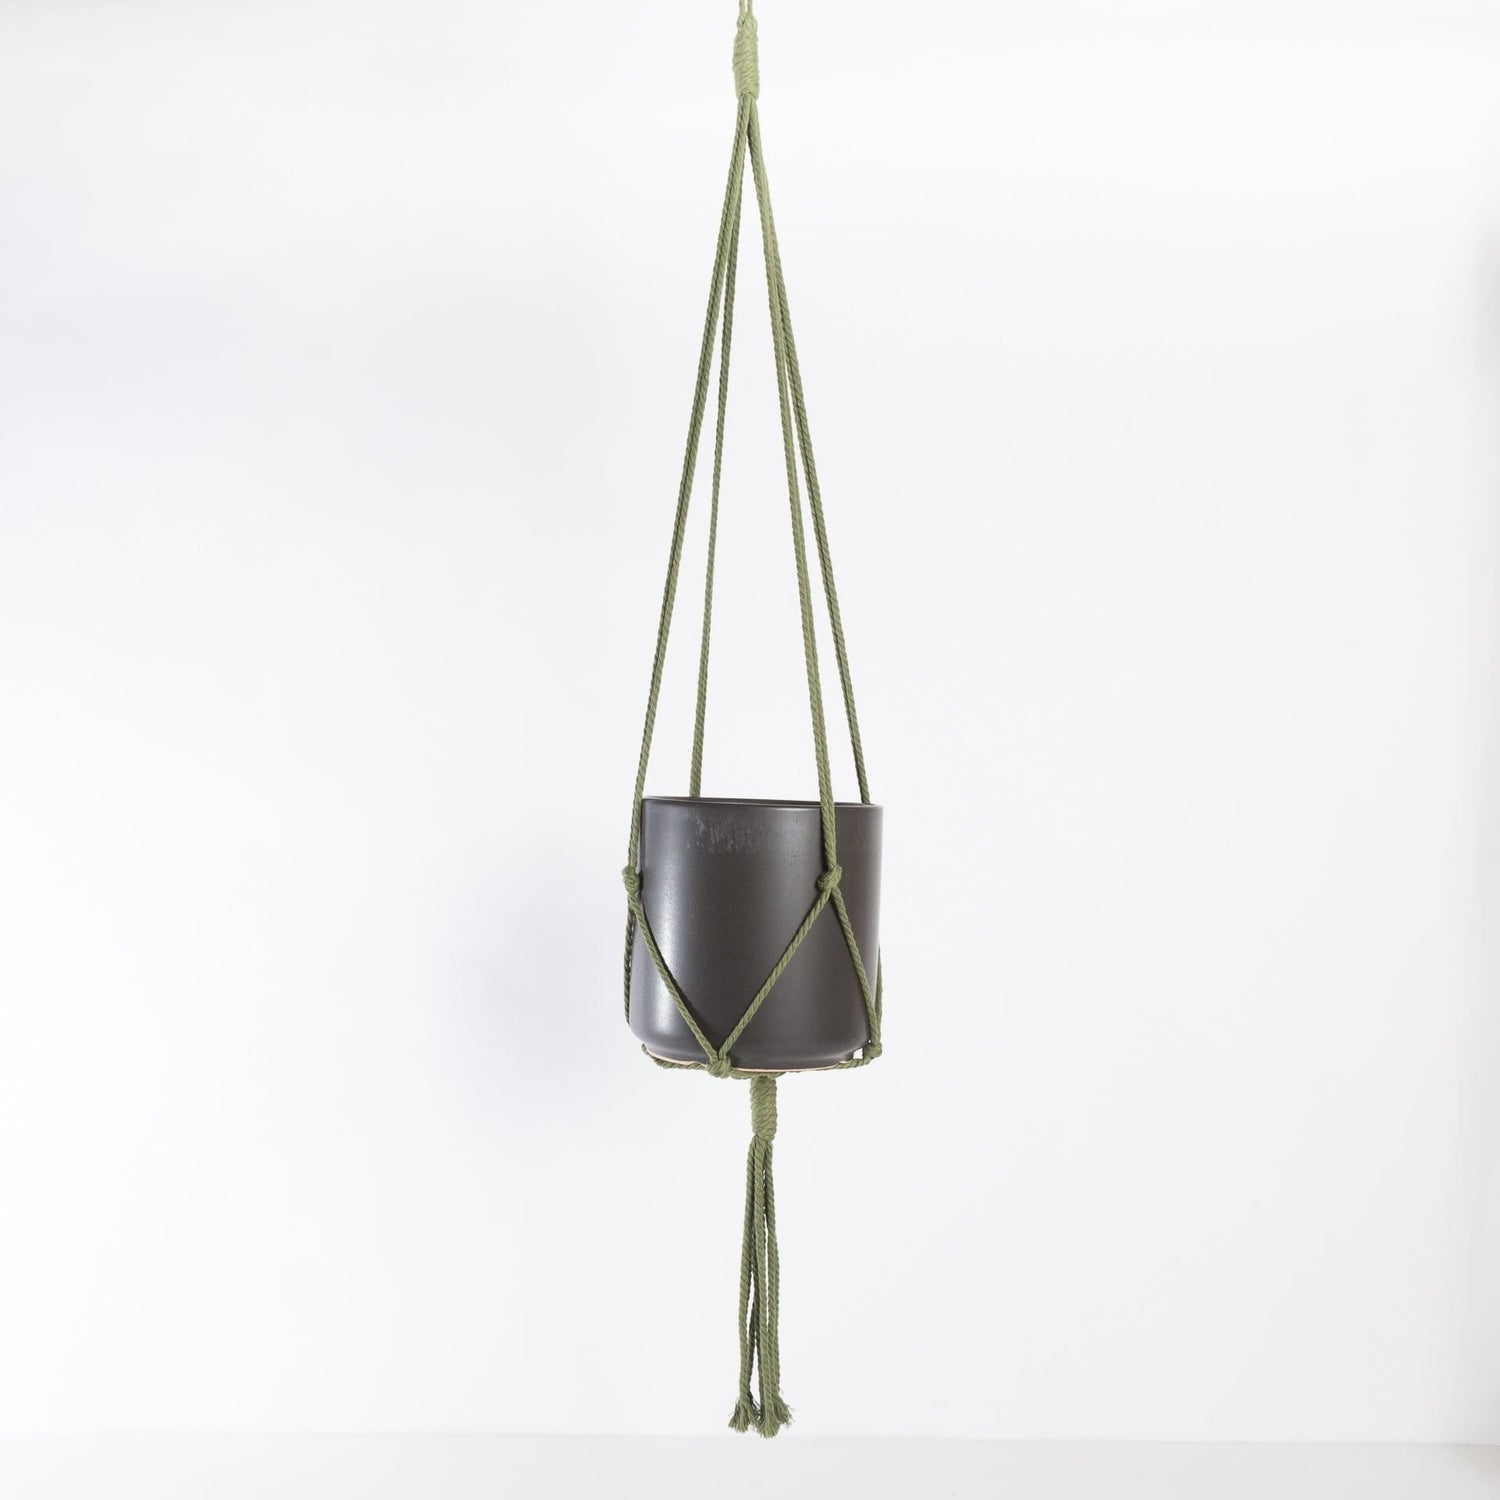 Macrame Plant Hanger - Army Green 36" - Urban Sprouts